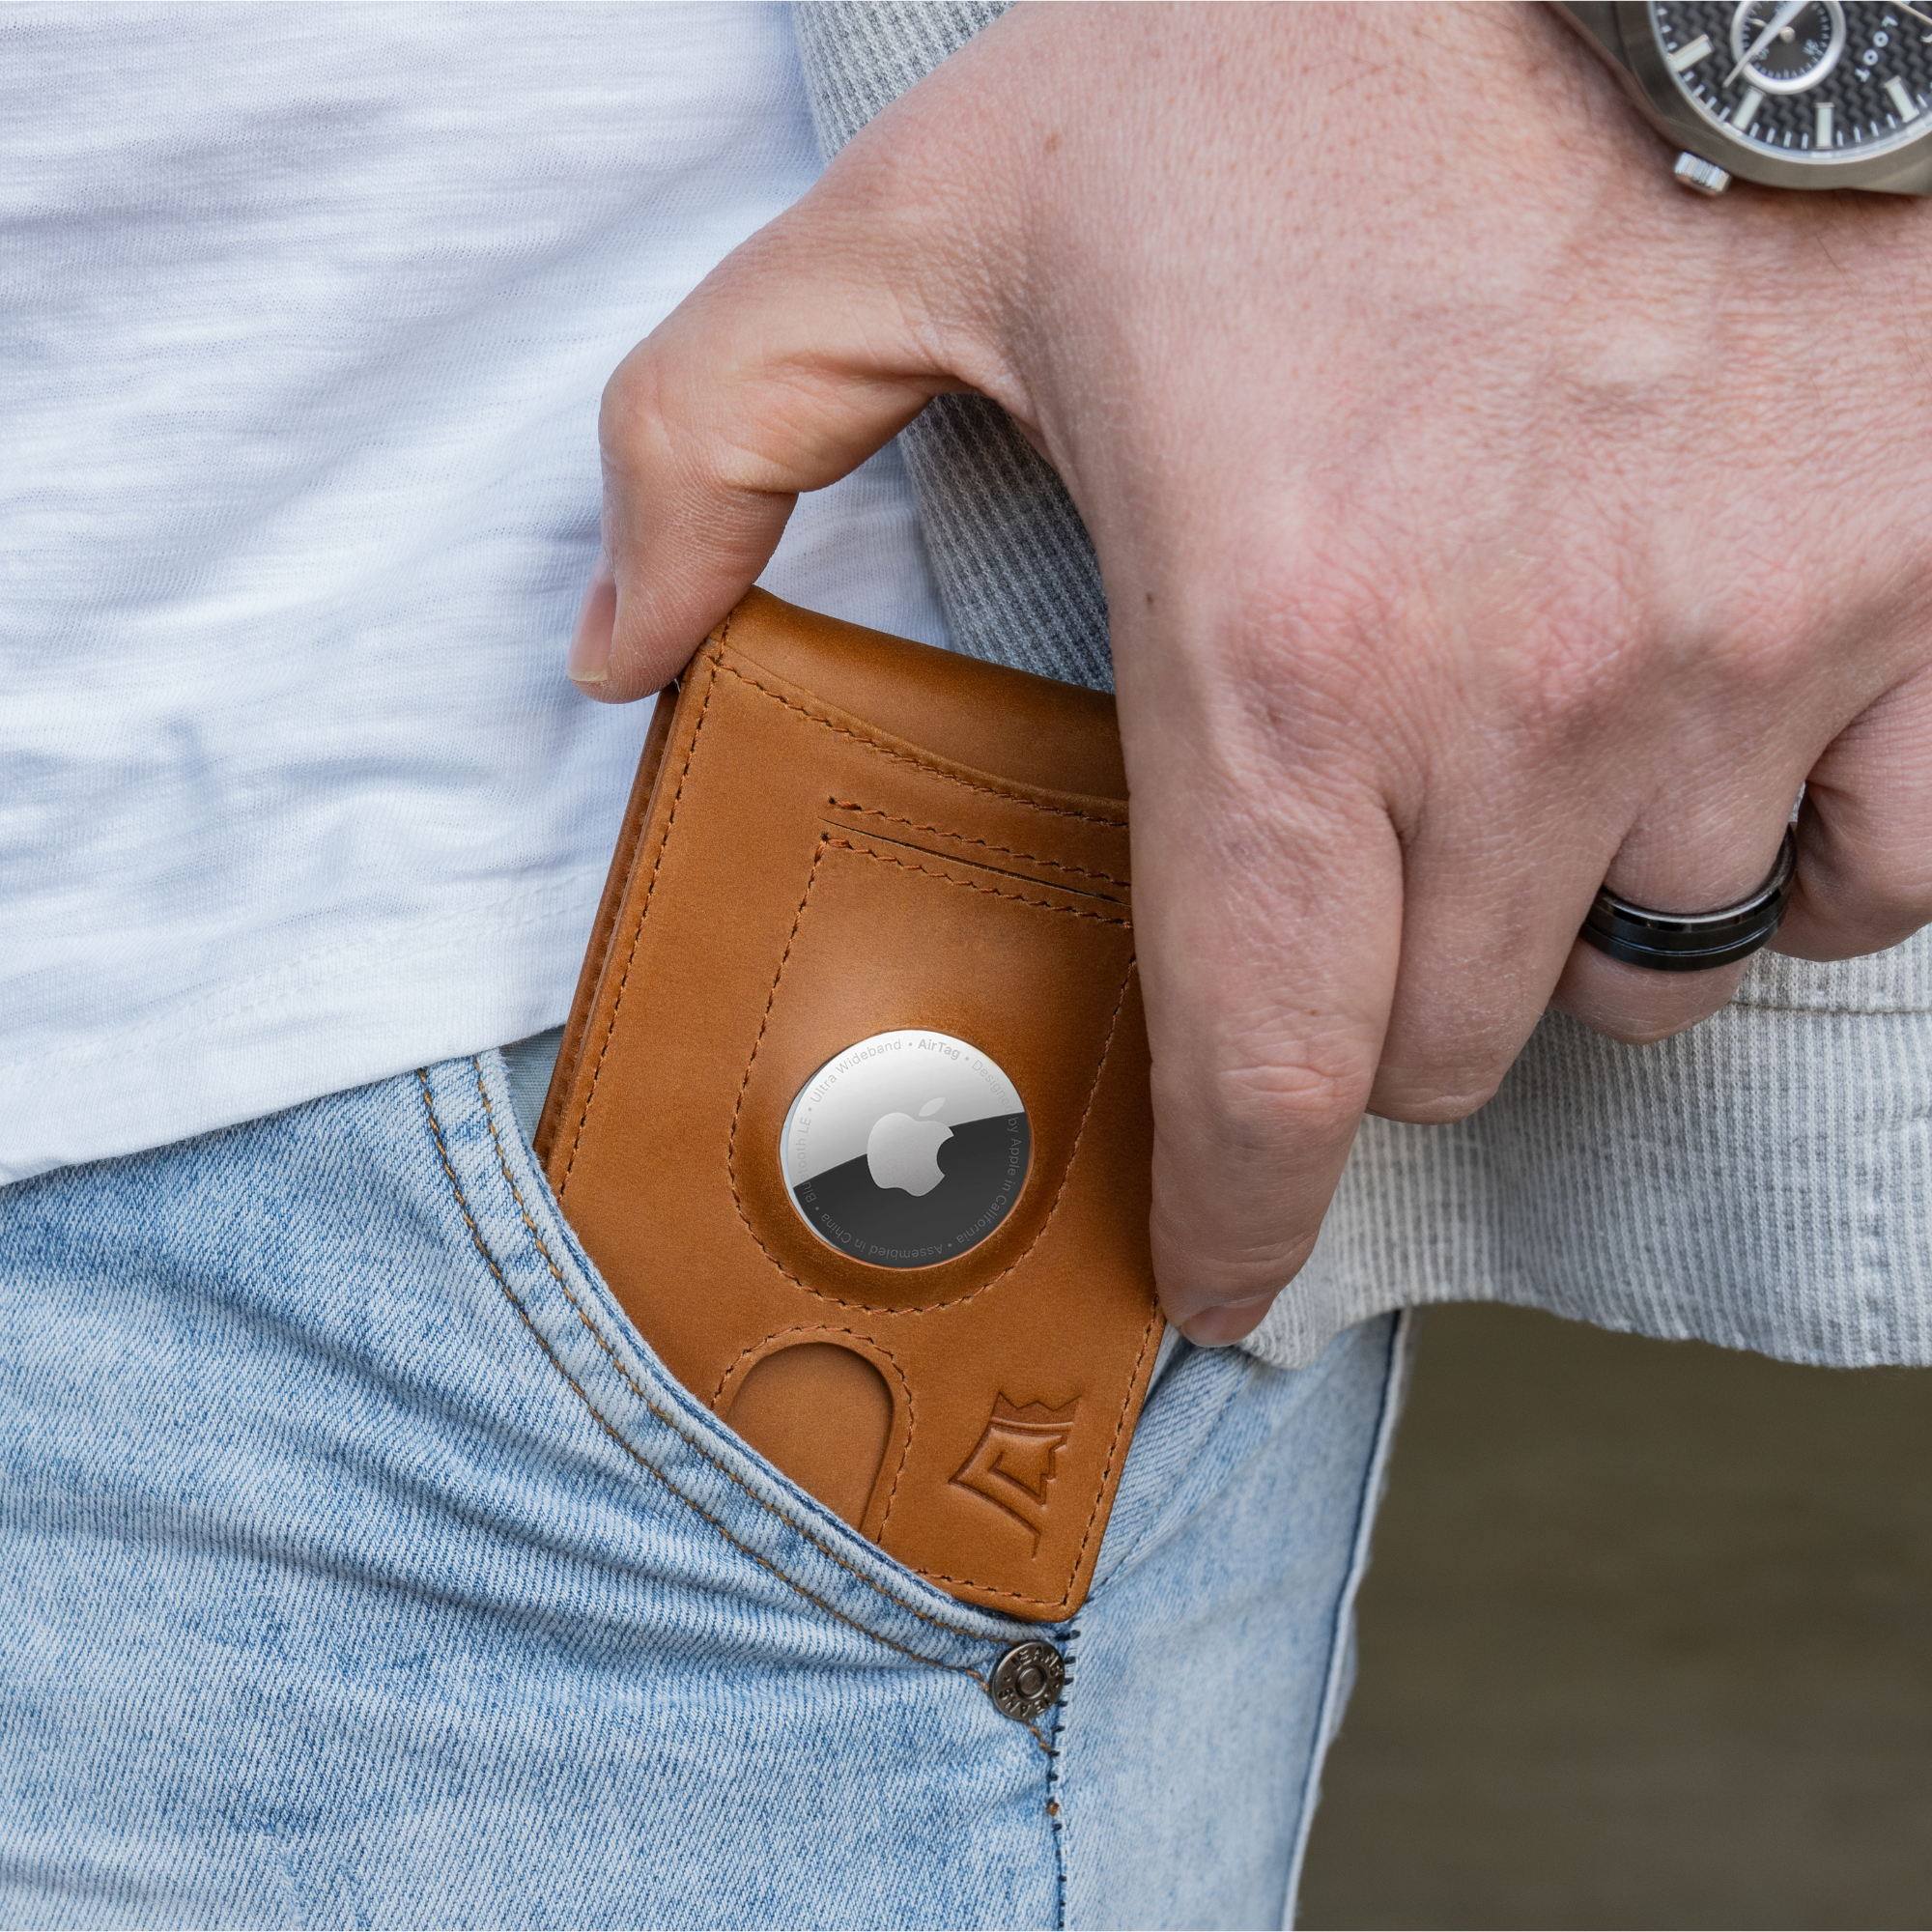 Person inserting an Apple AirTag into a brown leather wallet in their front jeans pocket.